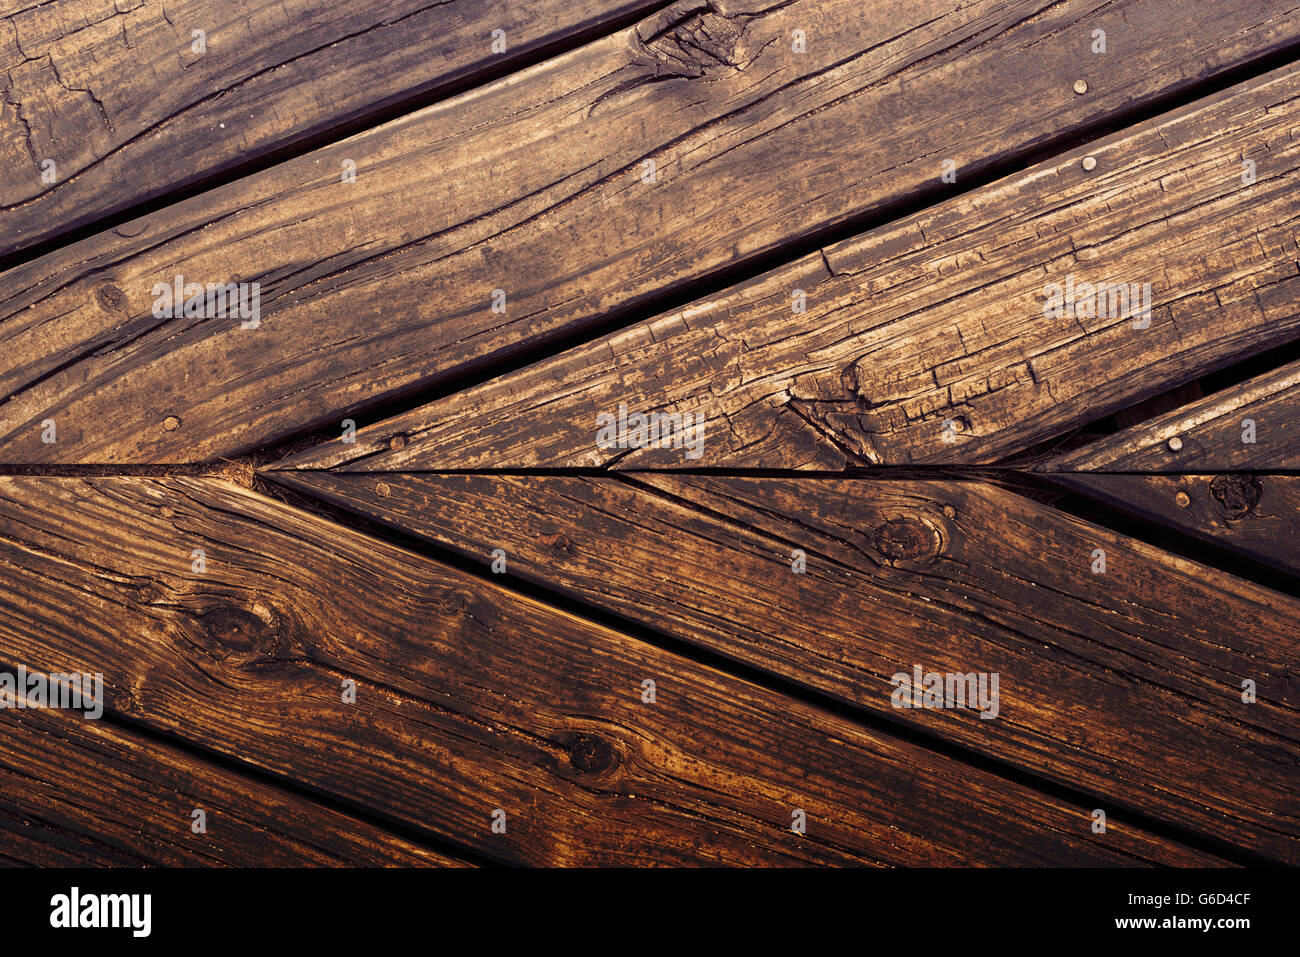 Close up top view of natural wood panel floor surface, hipster style rustic background texture. Stock Photo